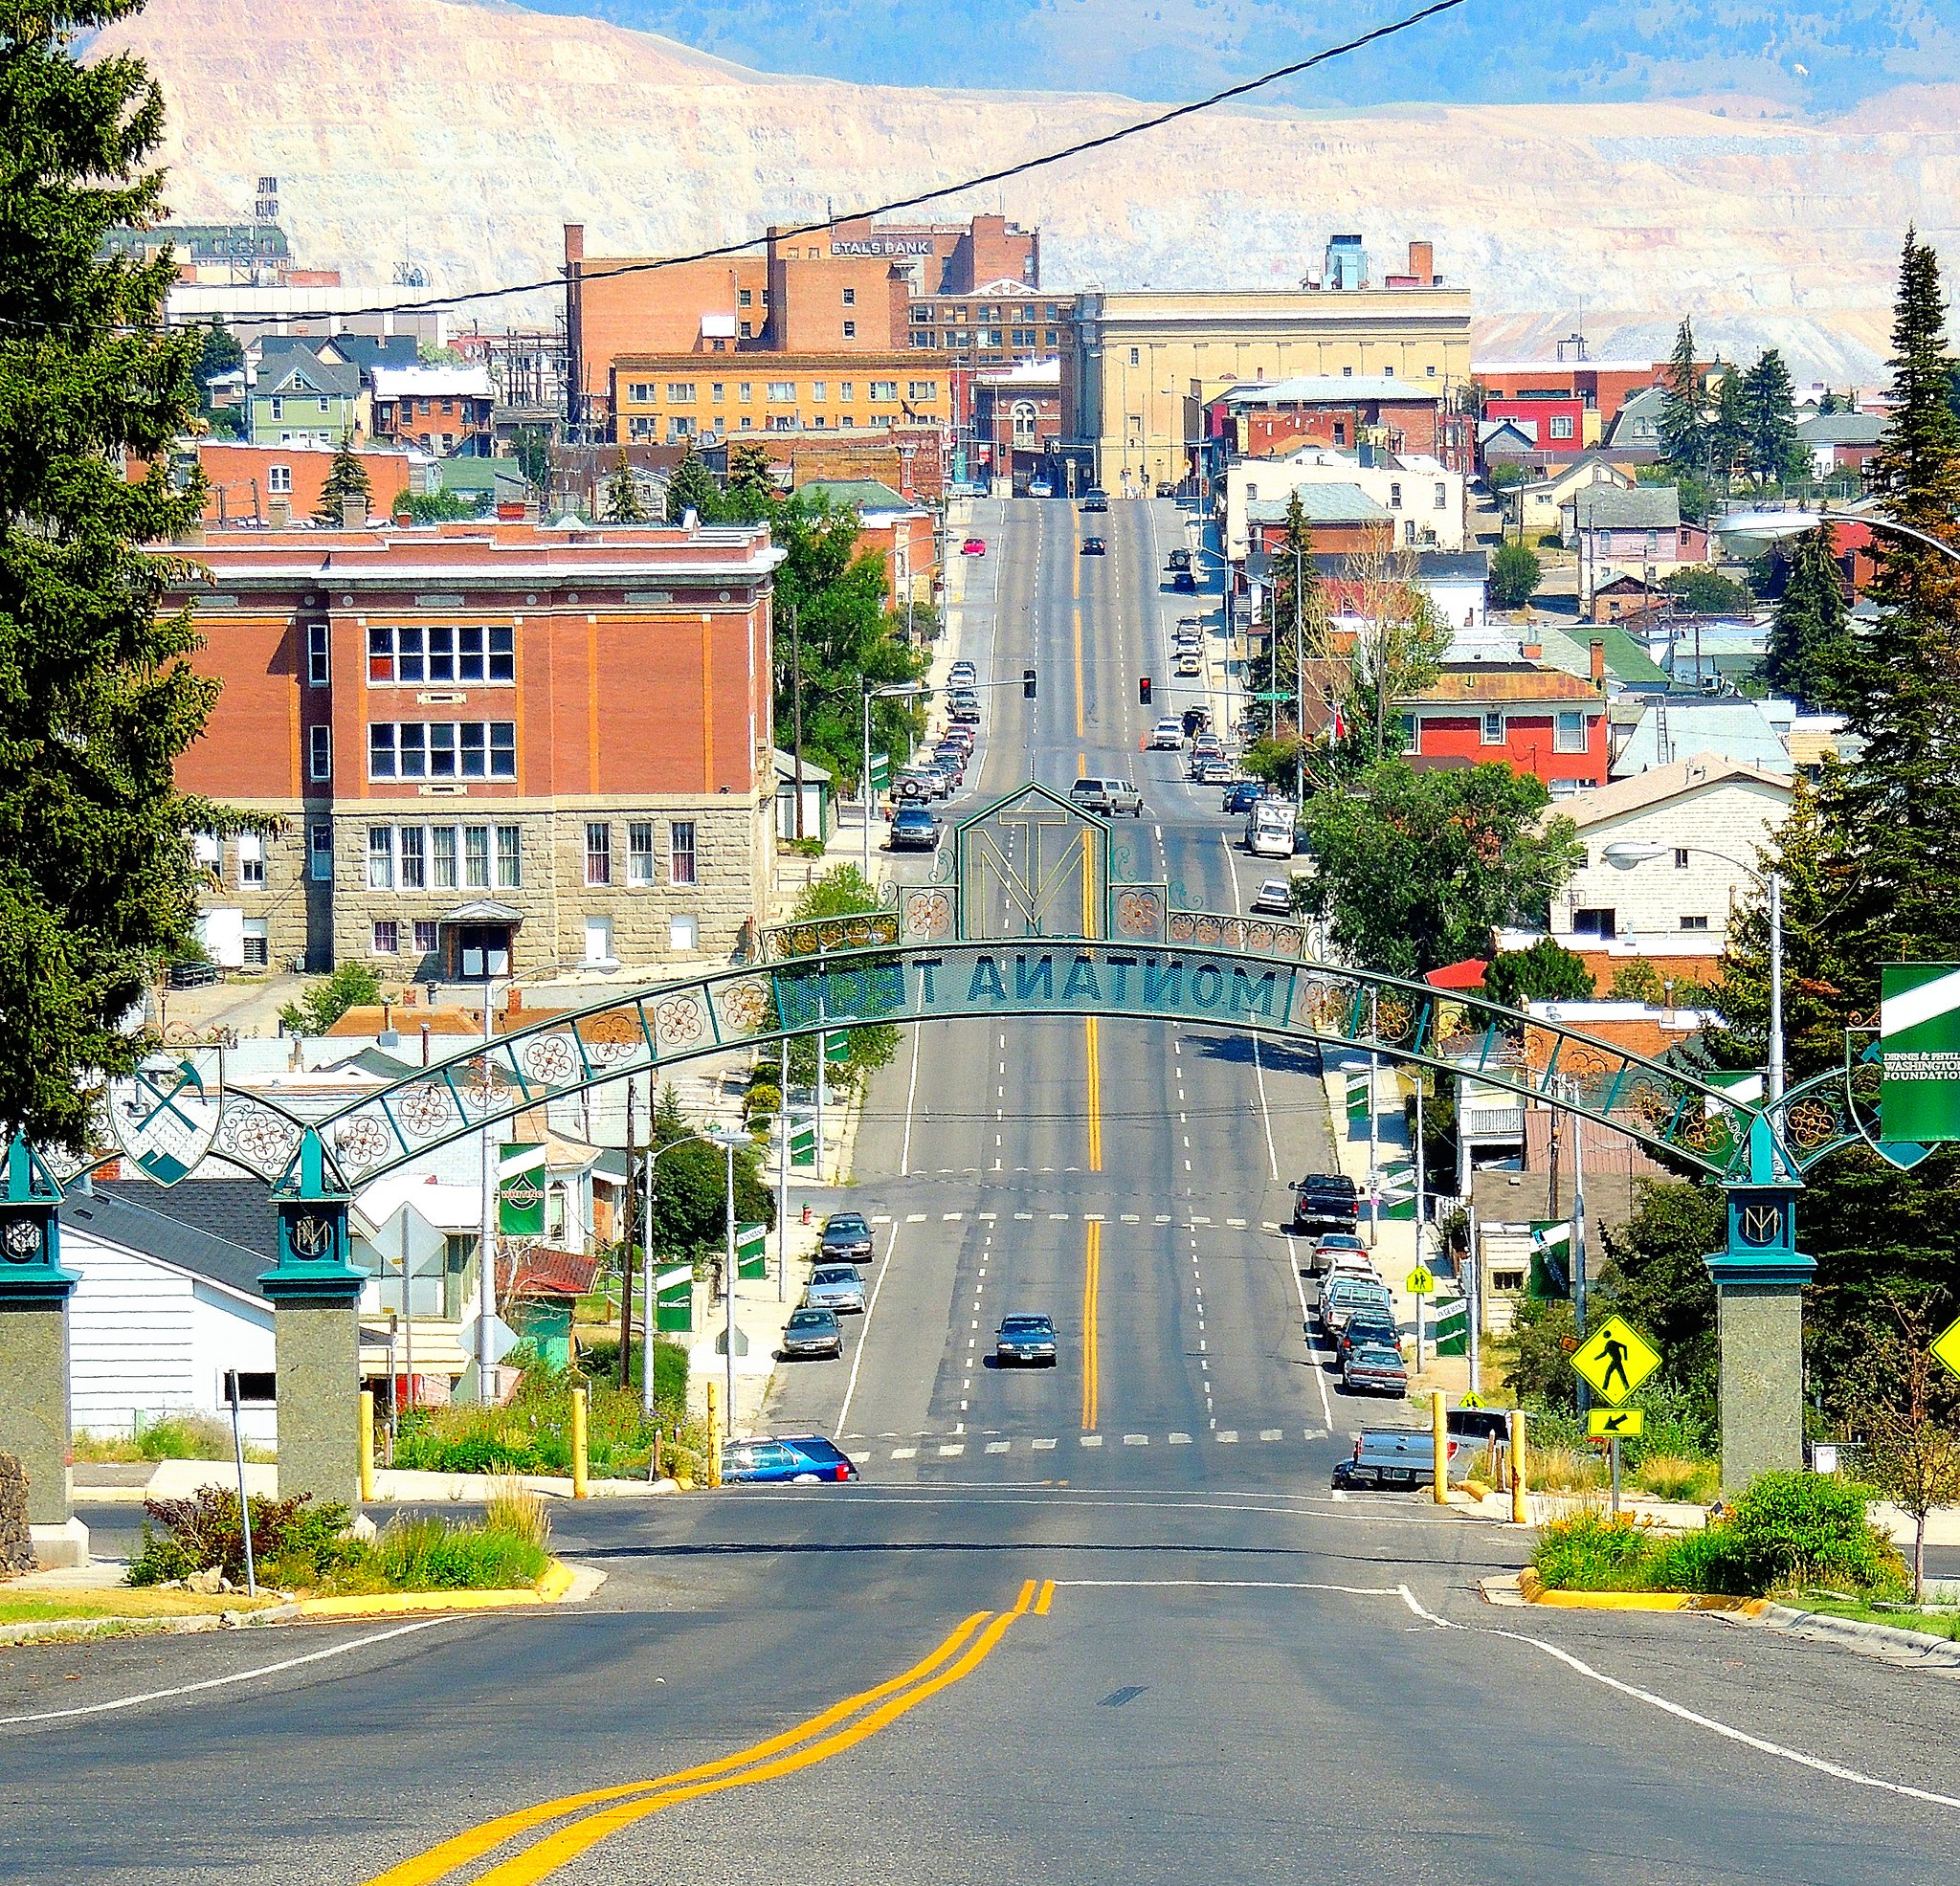 places to visit in butte montana